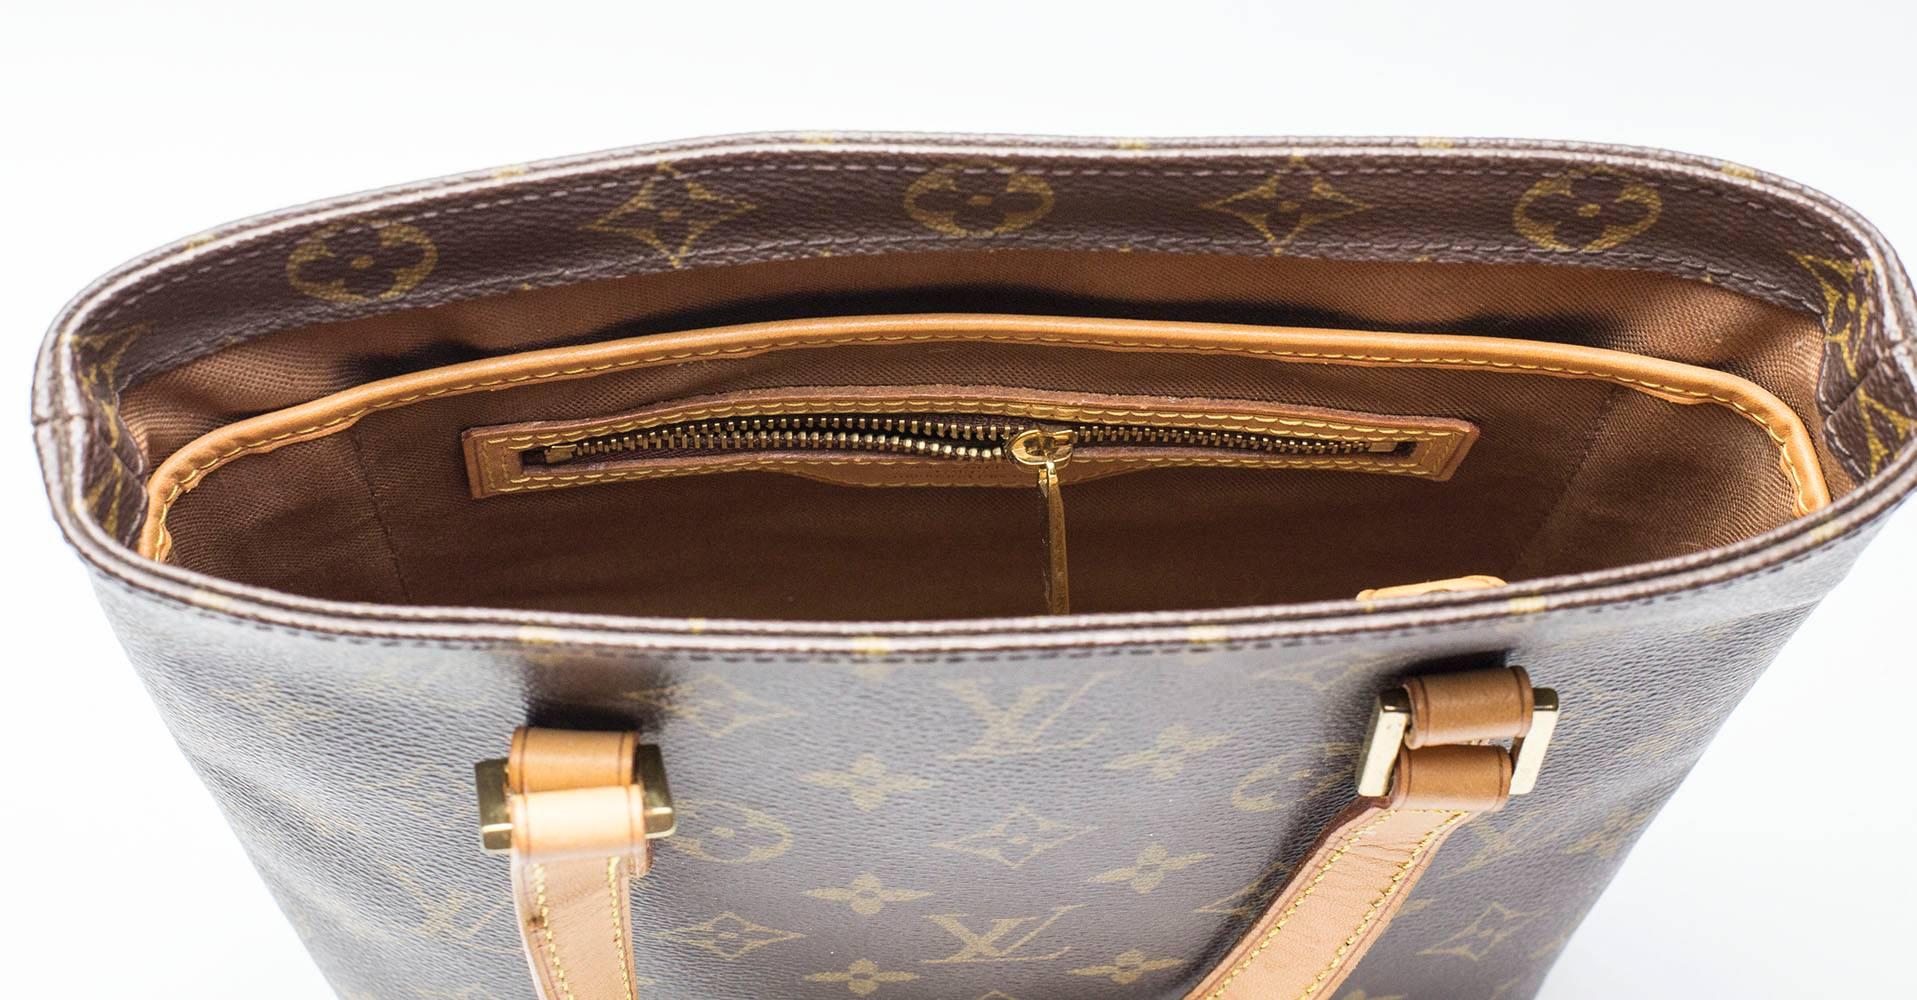 Louis Vuitton monogram canvas Purse with 2 leather handles. Inside has beige lining, 1 zipper pocket and 1 for mobile or glasses; interior marked: LOUIS VUITTON PARIS made in France; zipper tab marked with Louis Vuitton Logo; purse measures approx: